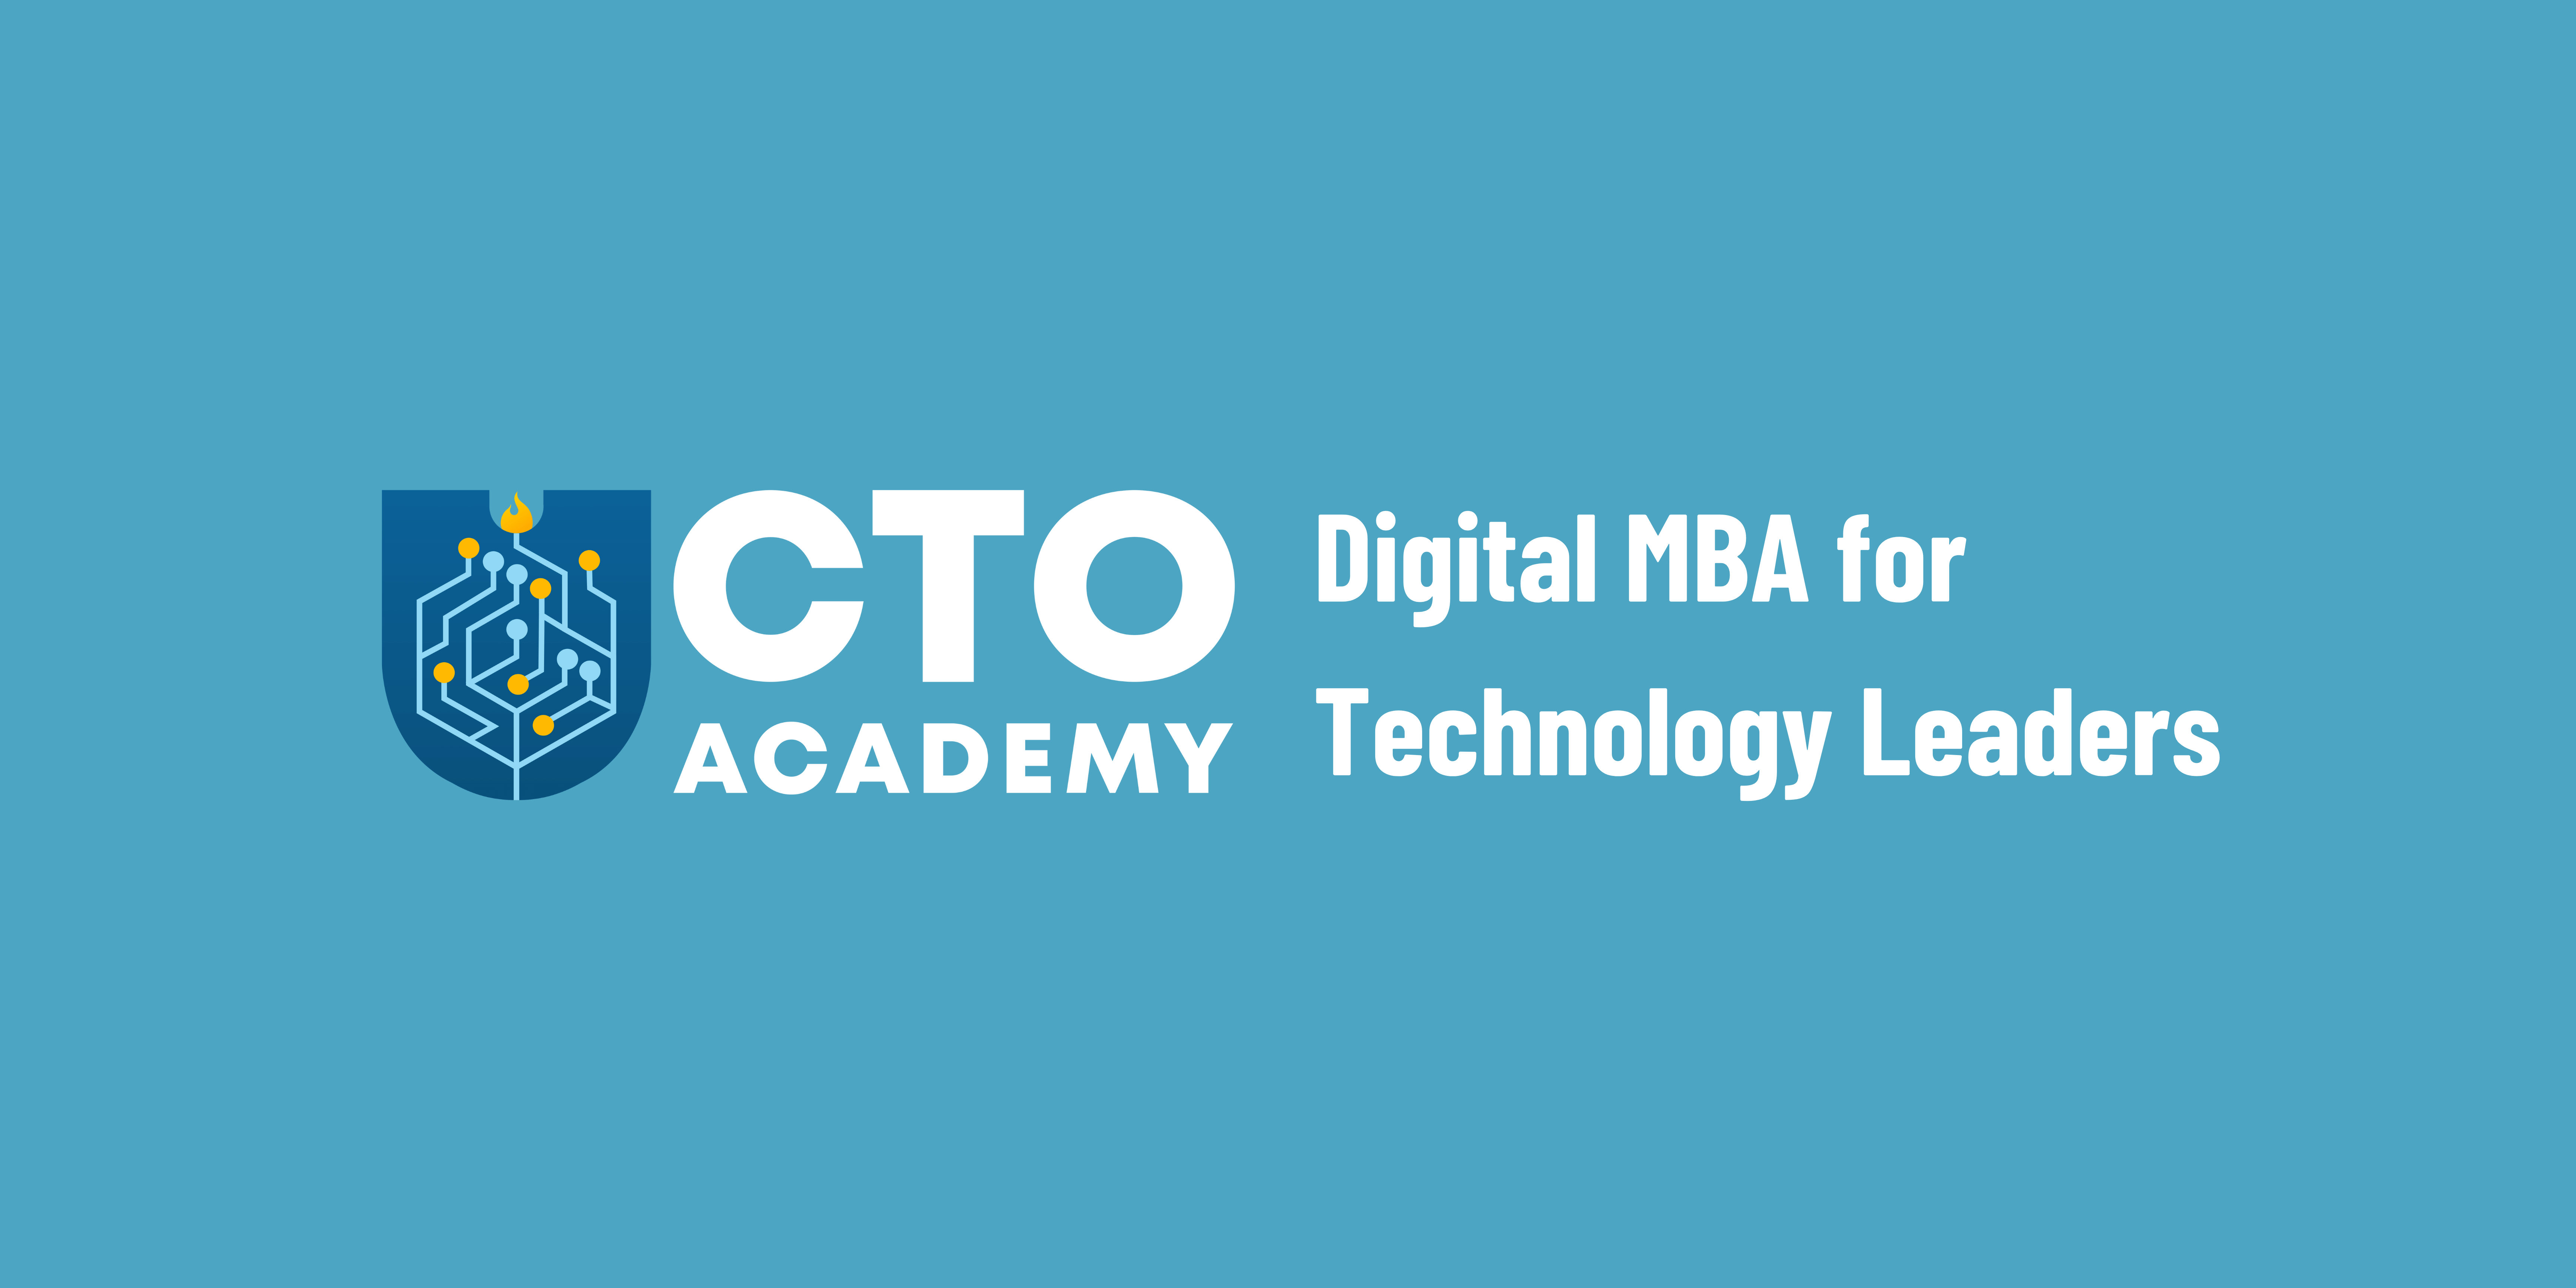 cto academy digital mba for technology leaders